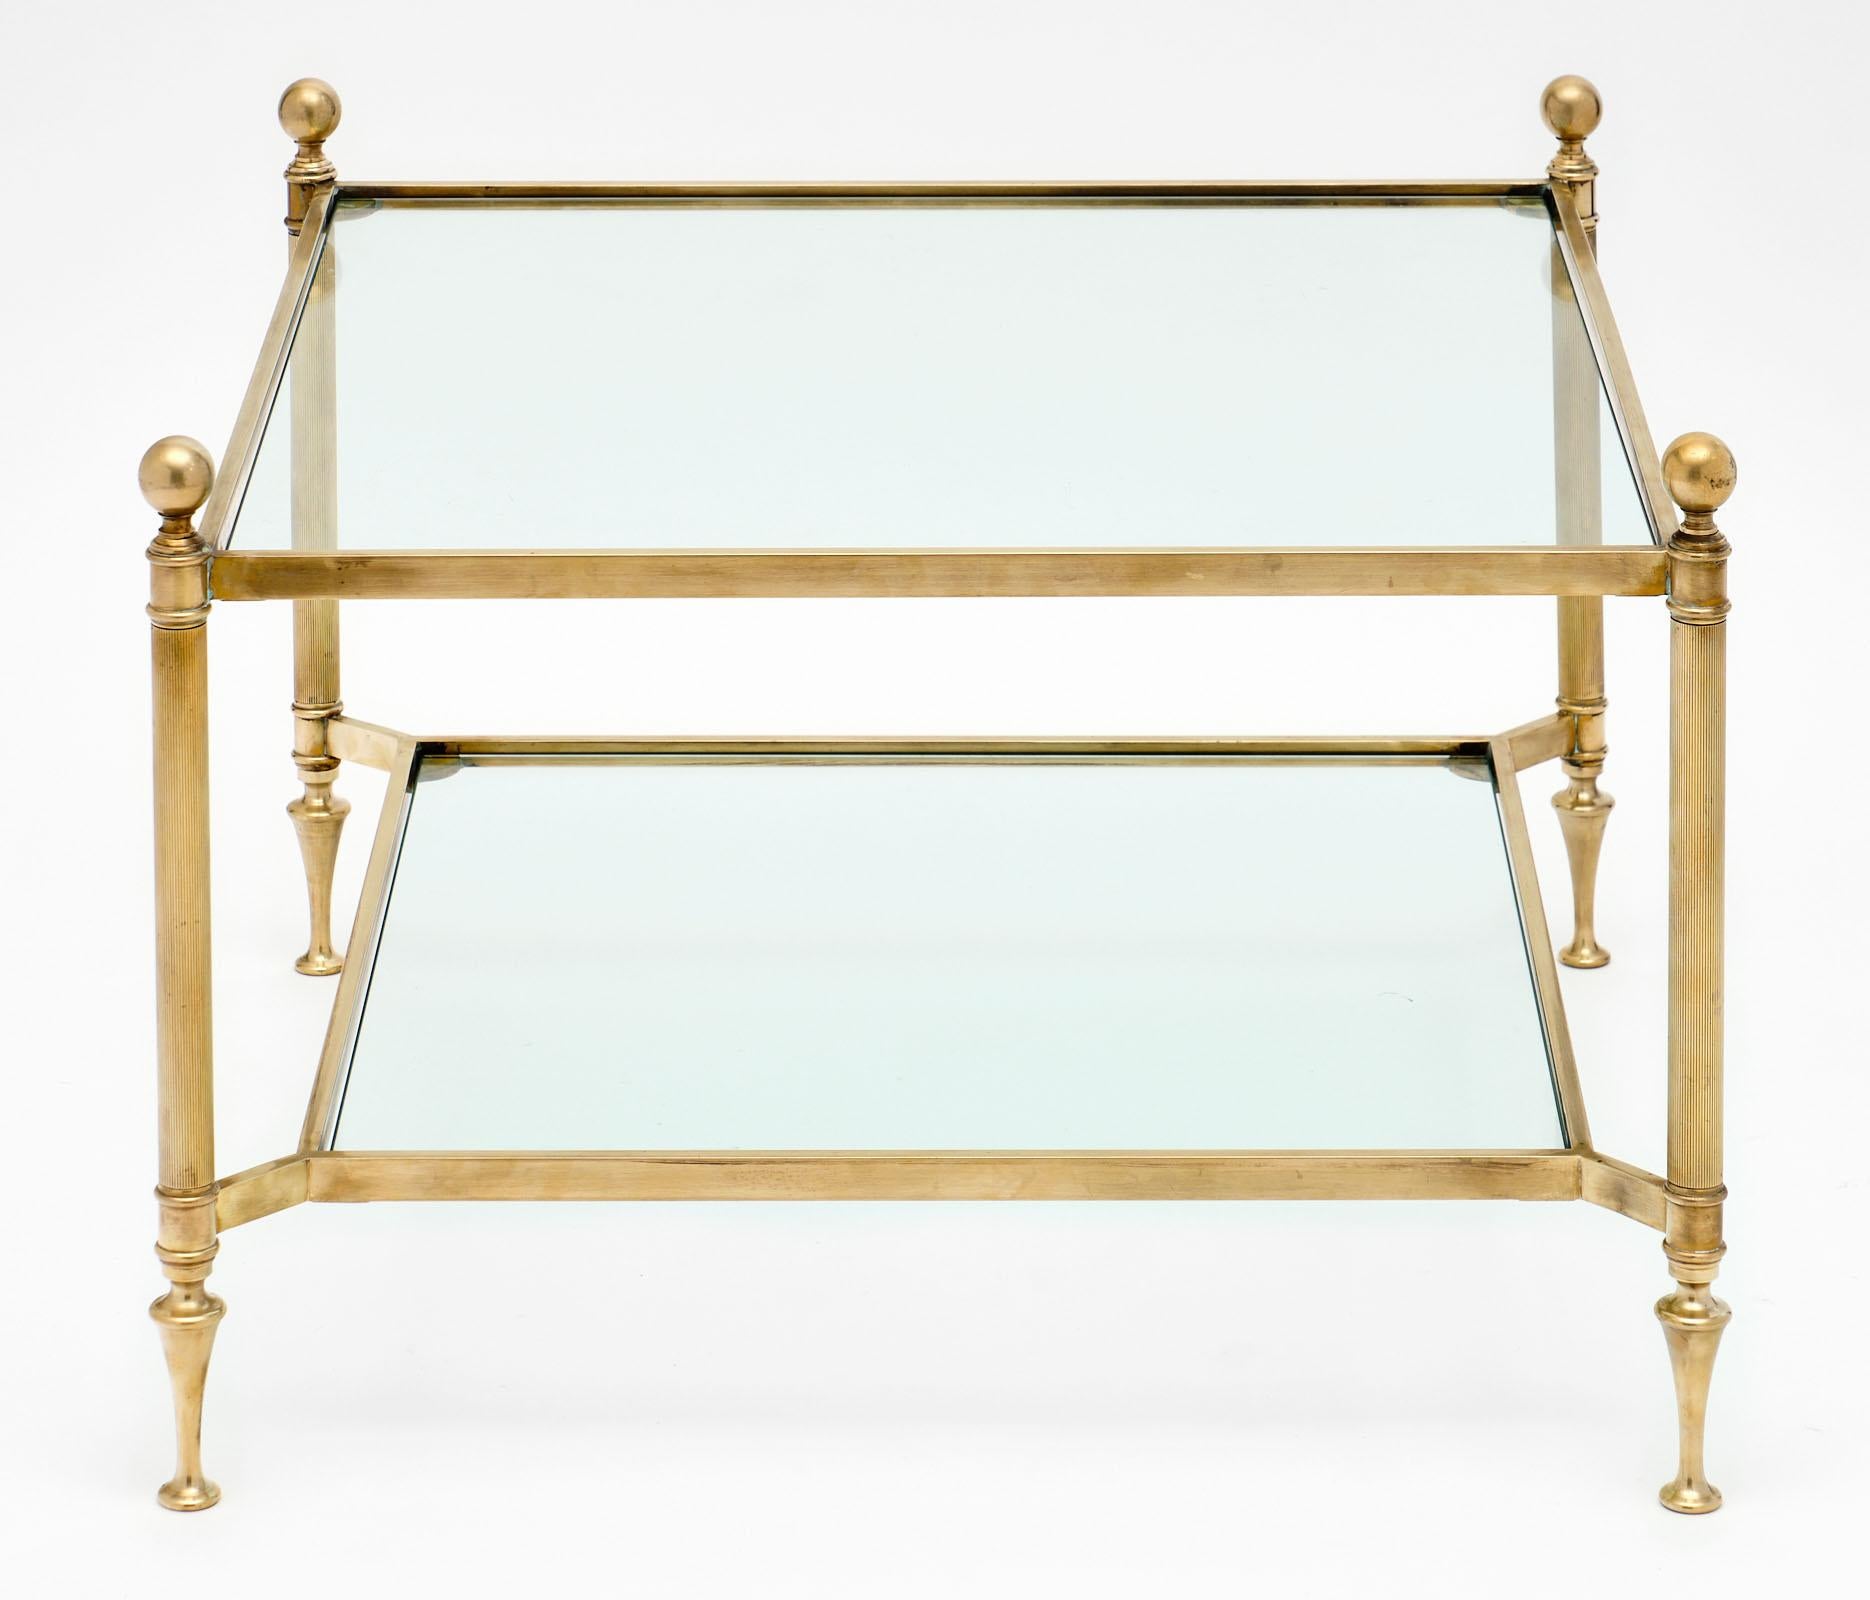 Maison Baguès square coffee table with a fine, gilt brass structure. The legs are ridged with spherical brass finials, and holds two shelves of clear glass. This could be used as a coffee table or side table.